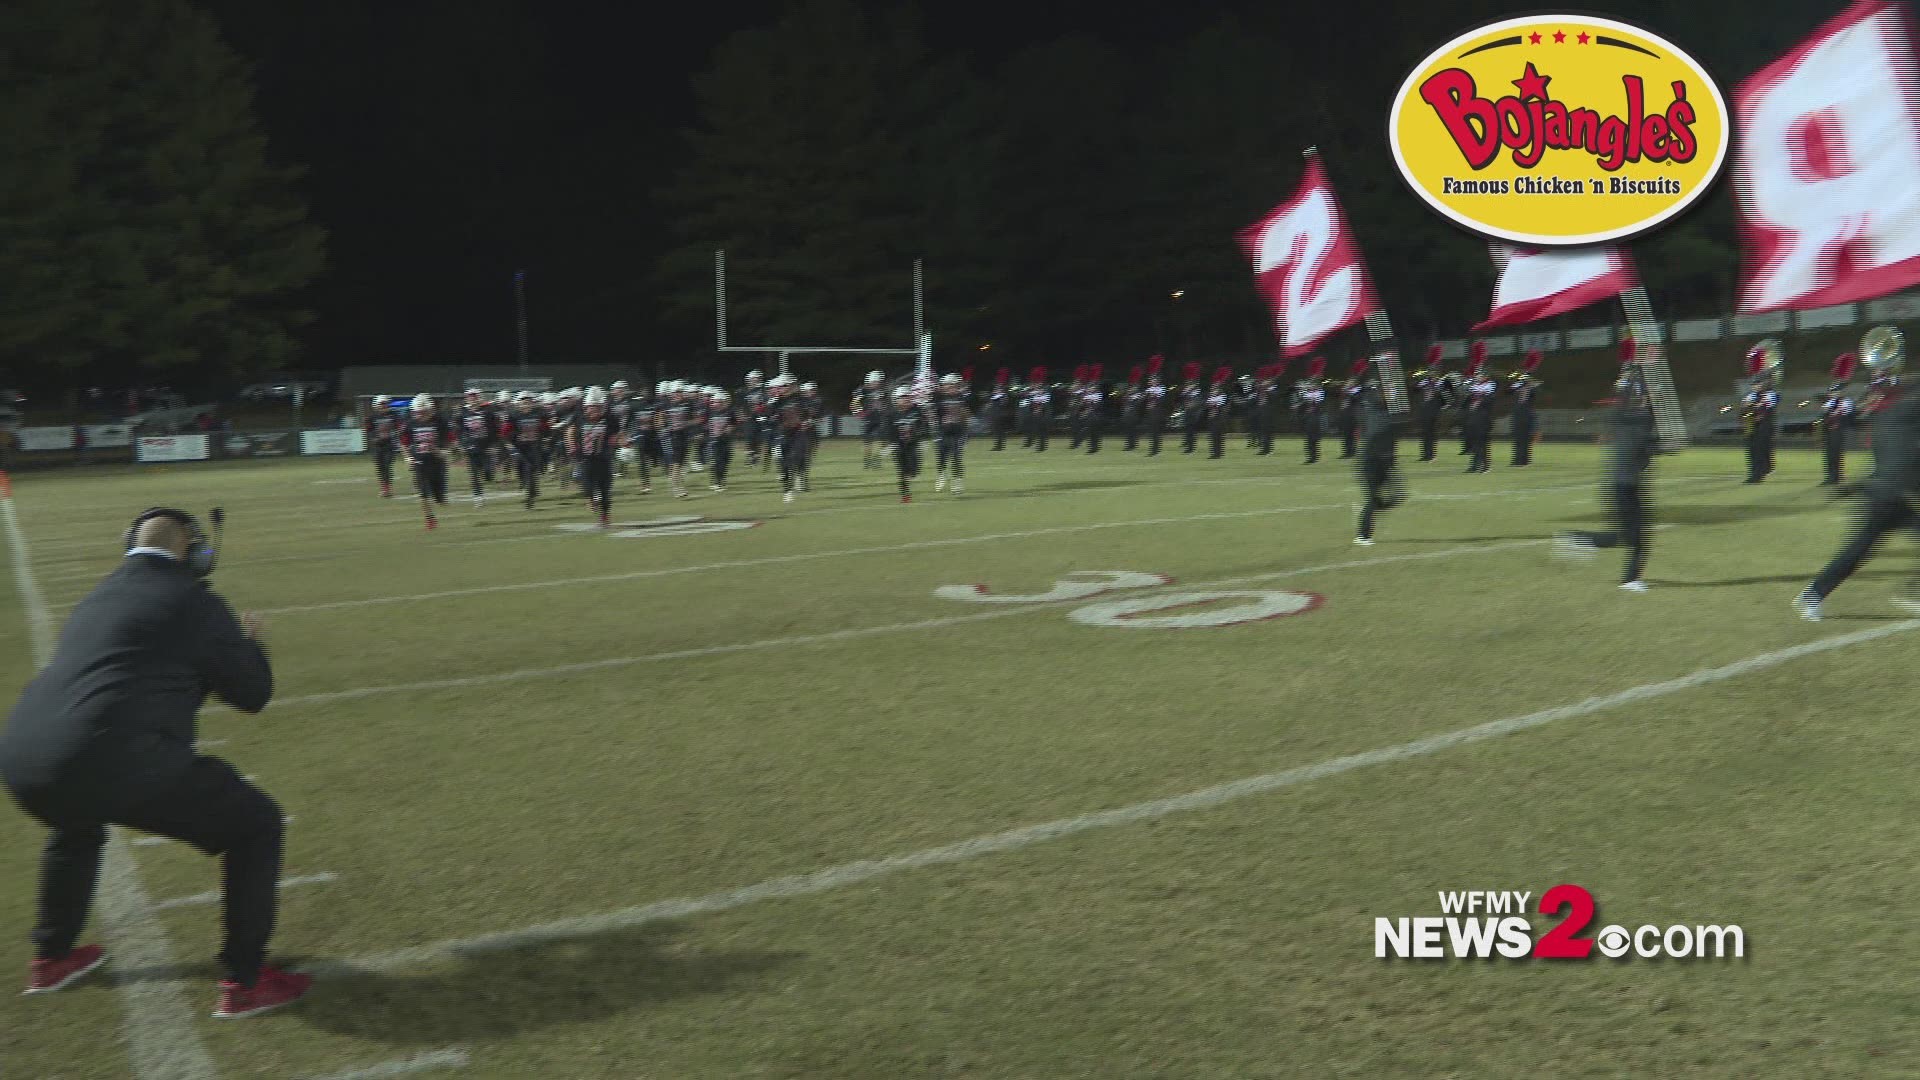 Game of the week between Mount Airy Bears at East Surry Cardinals. Cardinals come out on top over the Bears 42 to 10.